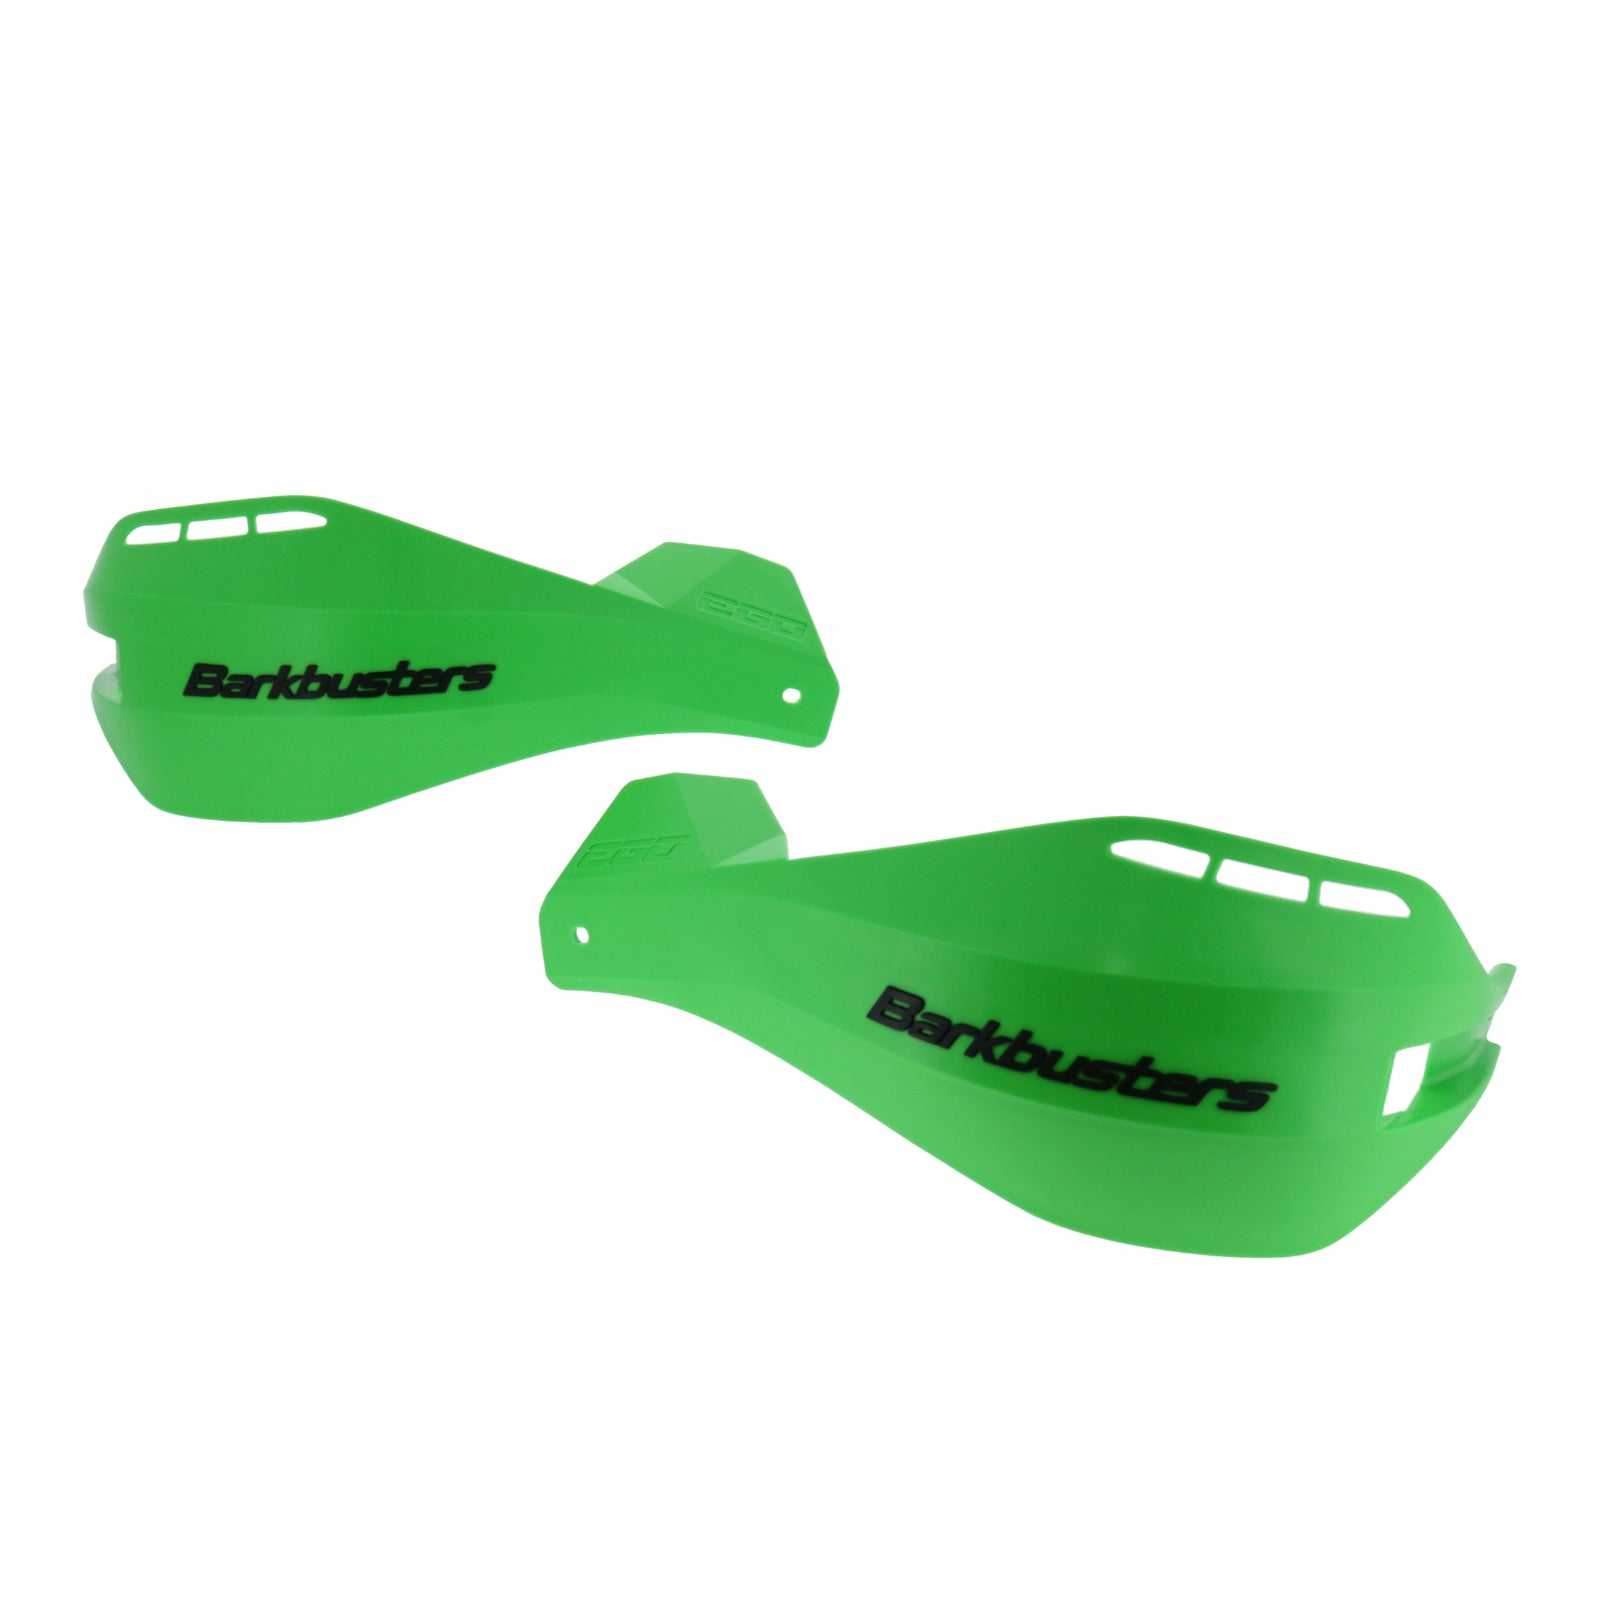 Barkbusters, Barkbusters Ego Replacement Plastics - Green